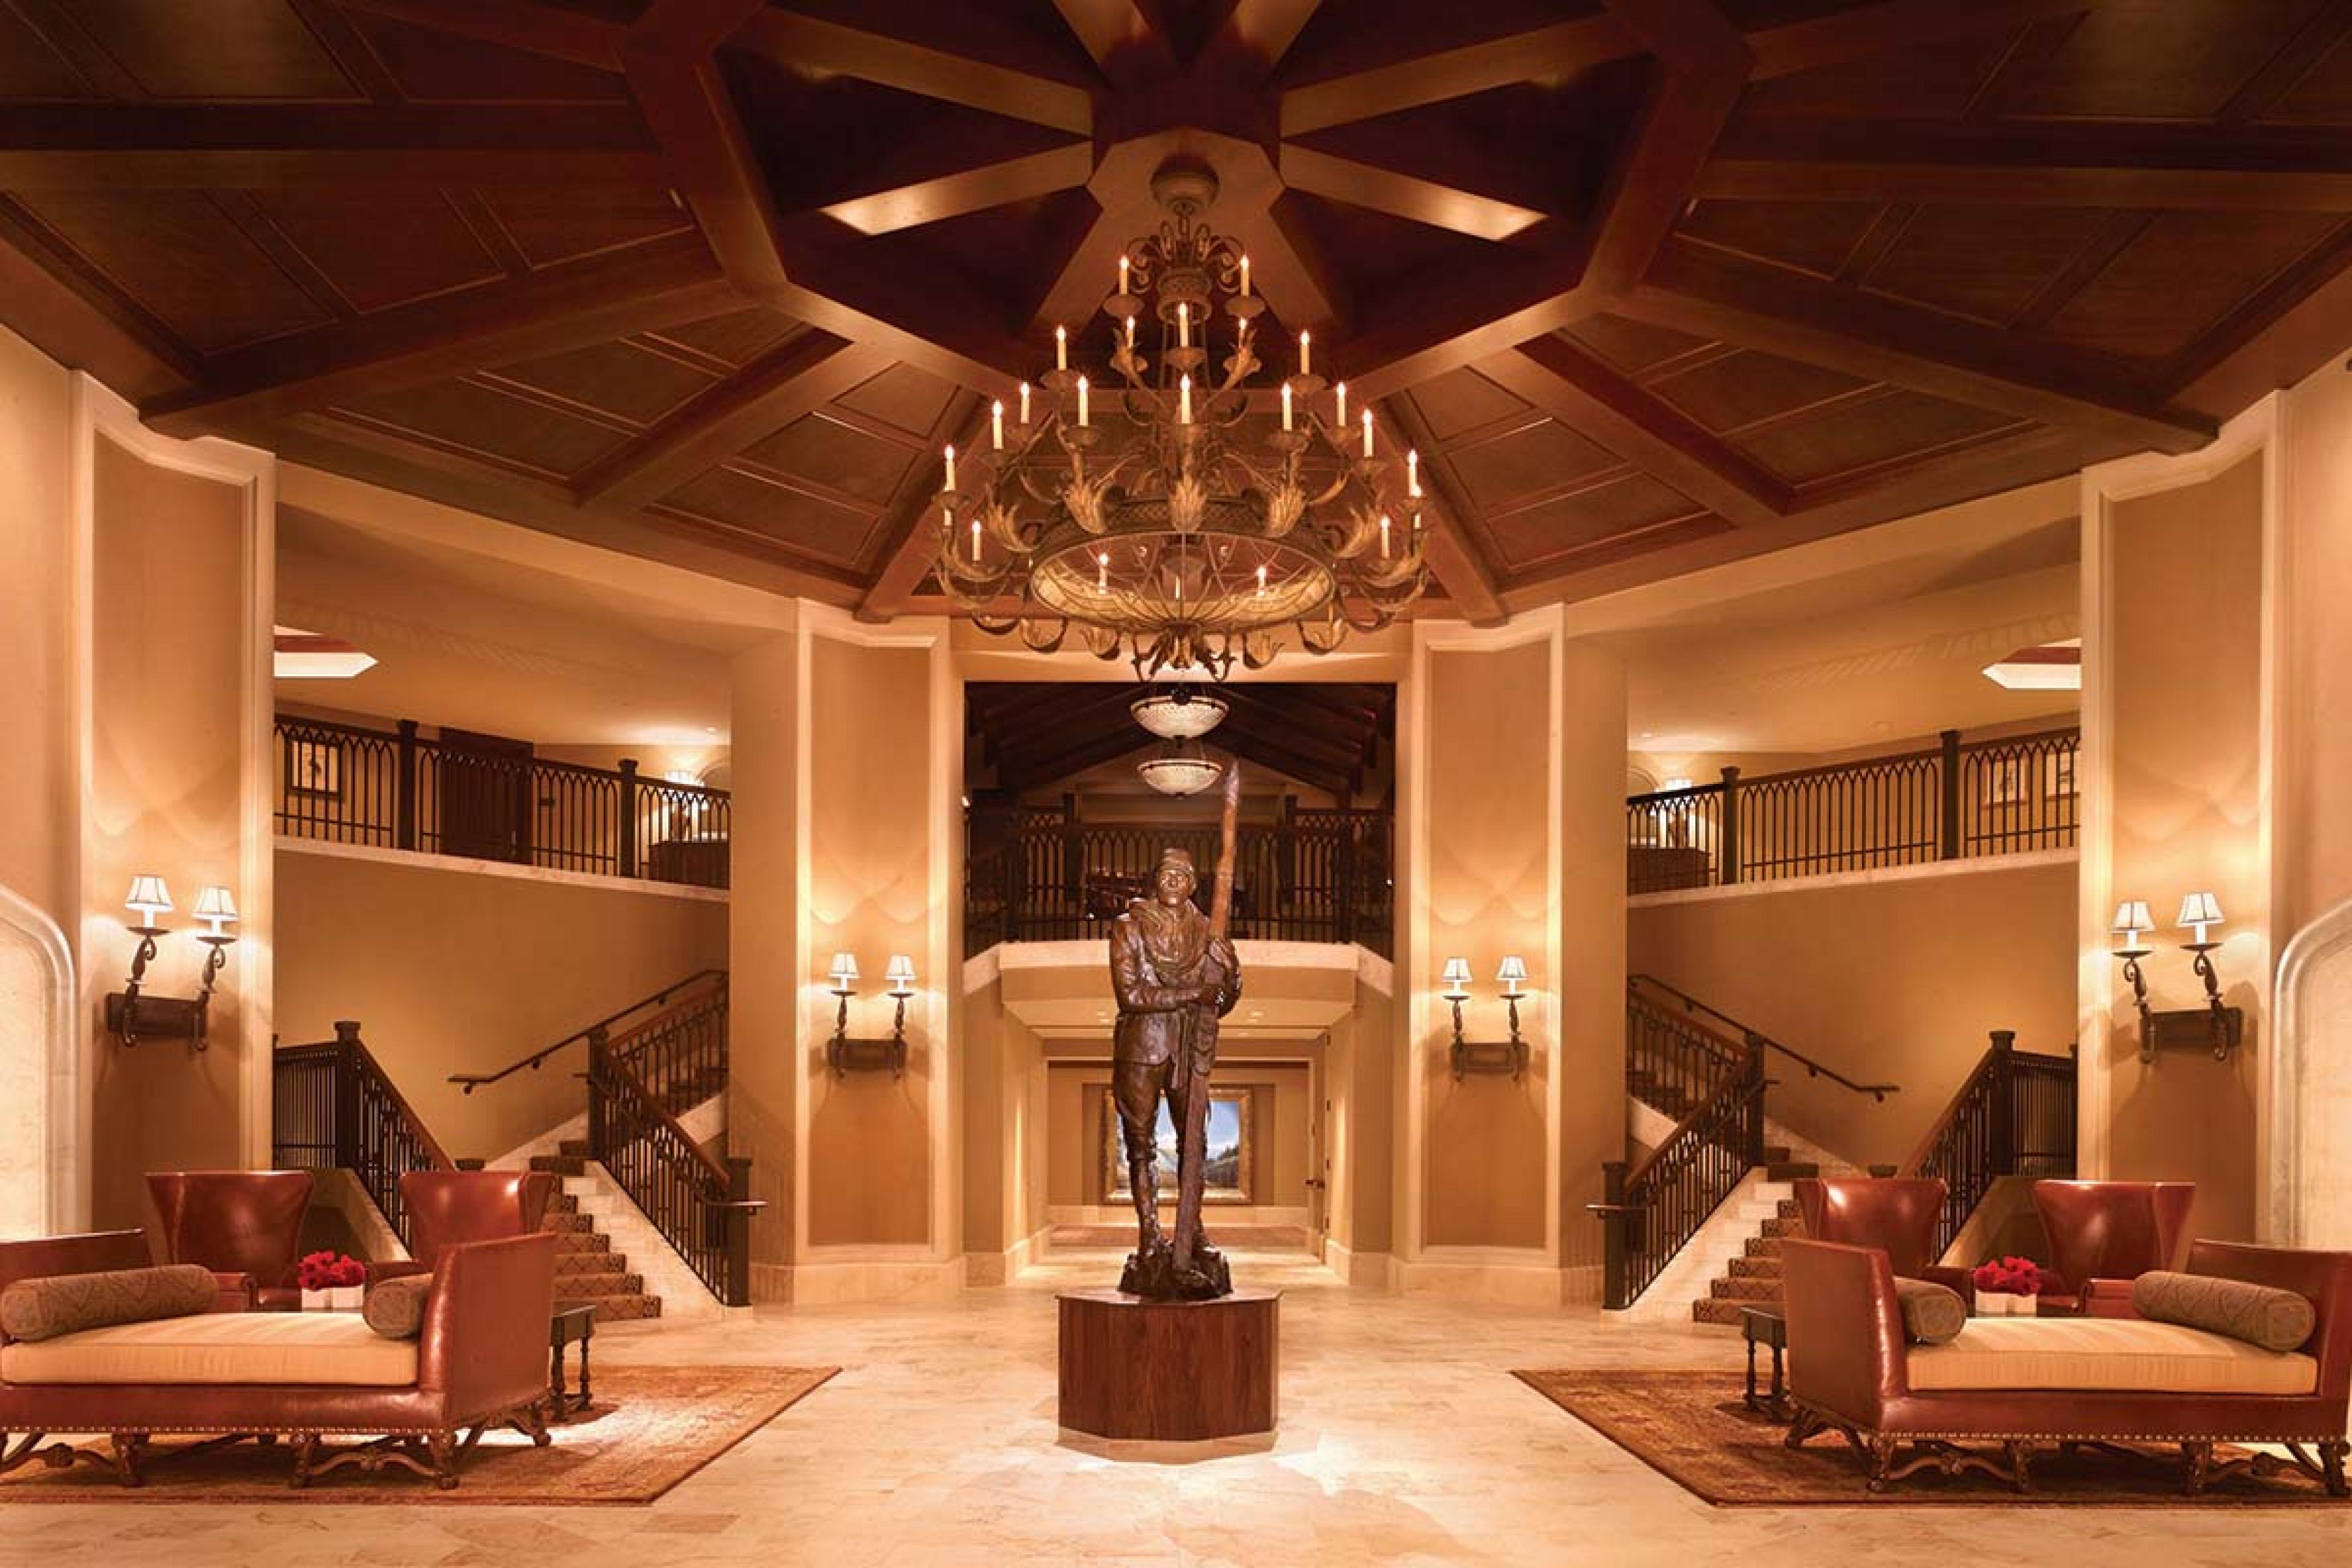 large entry hall with polished wood and a ski statue